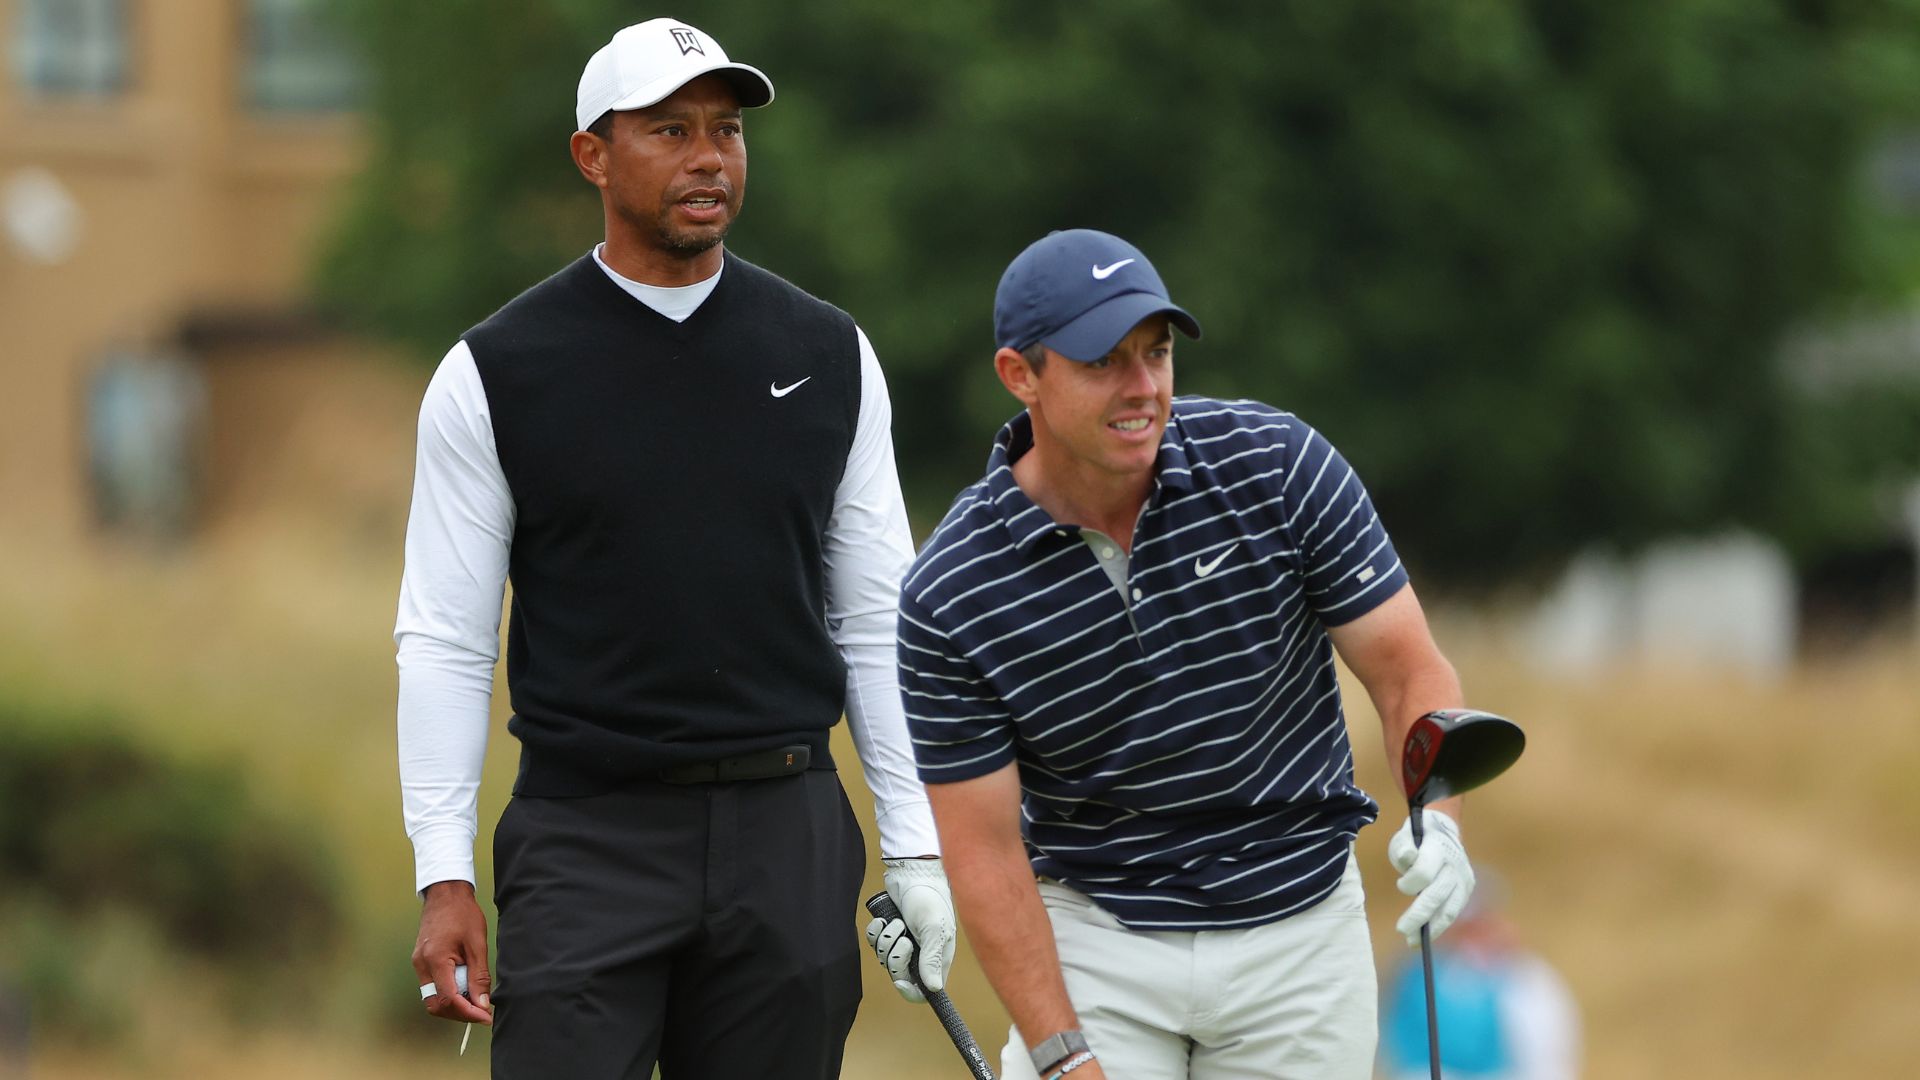 Rory McIlroy says he gave Tiger Woods COVID just before The Open Championship